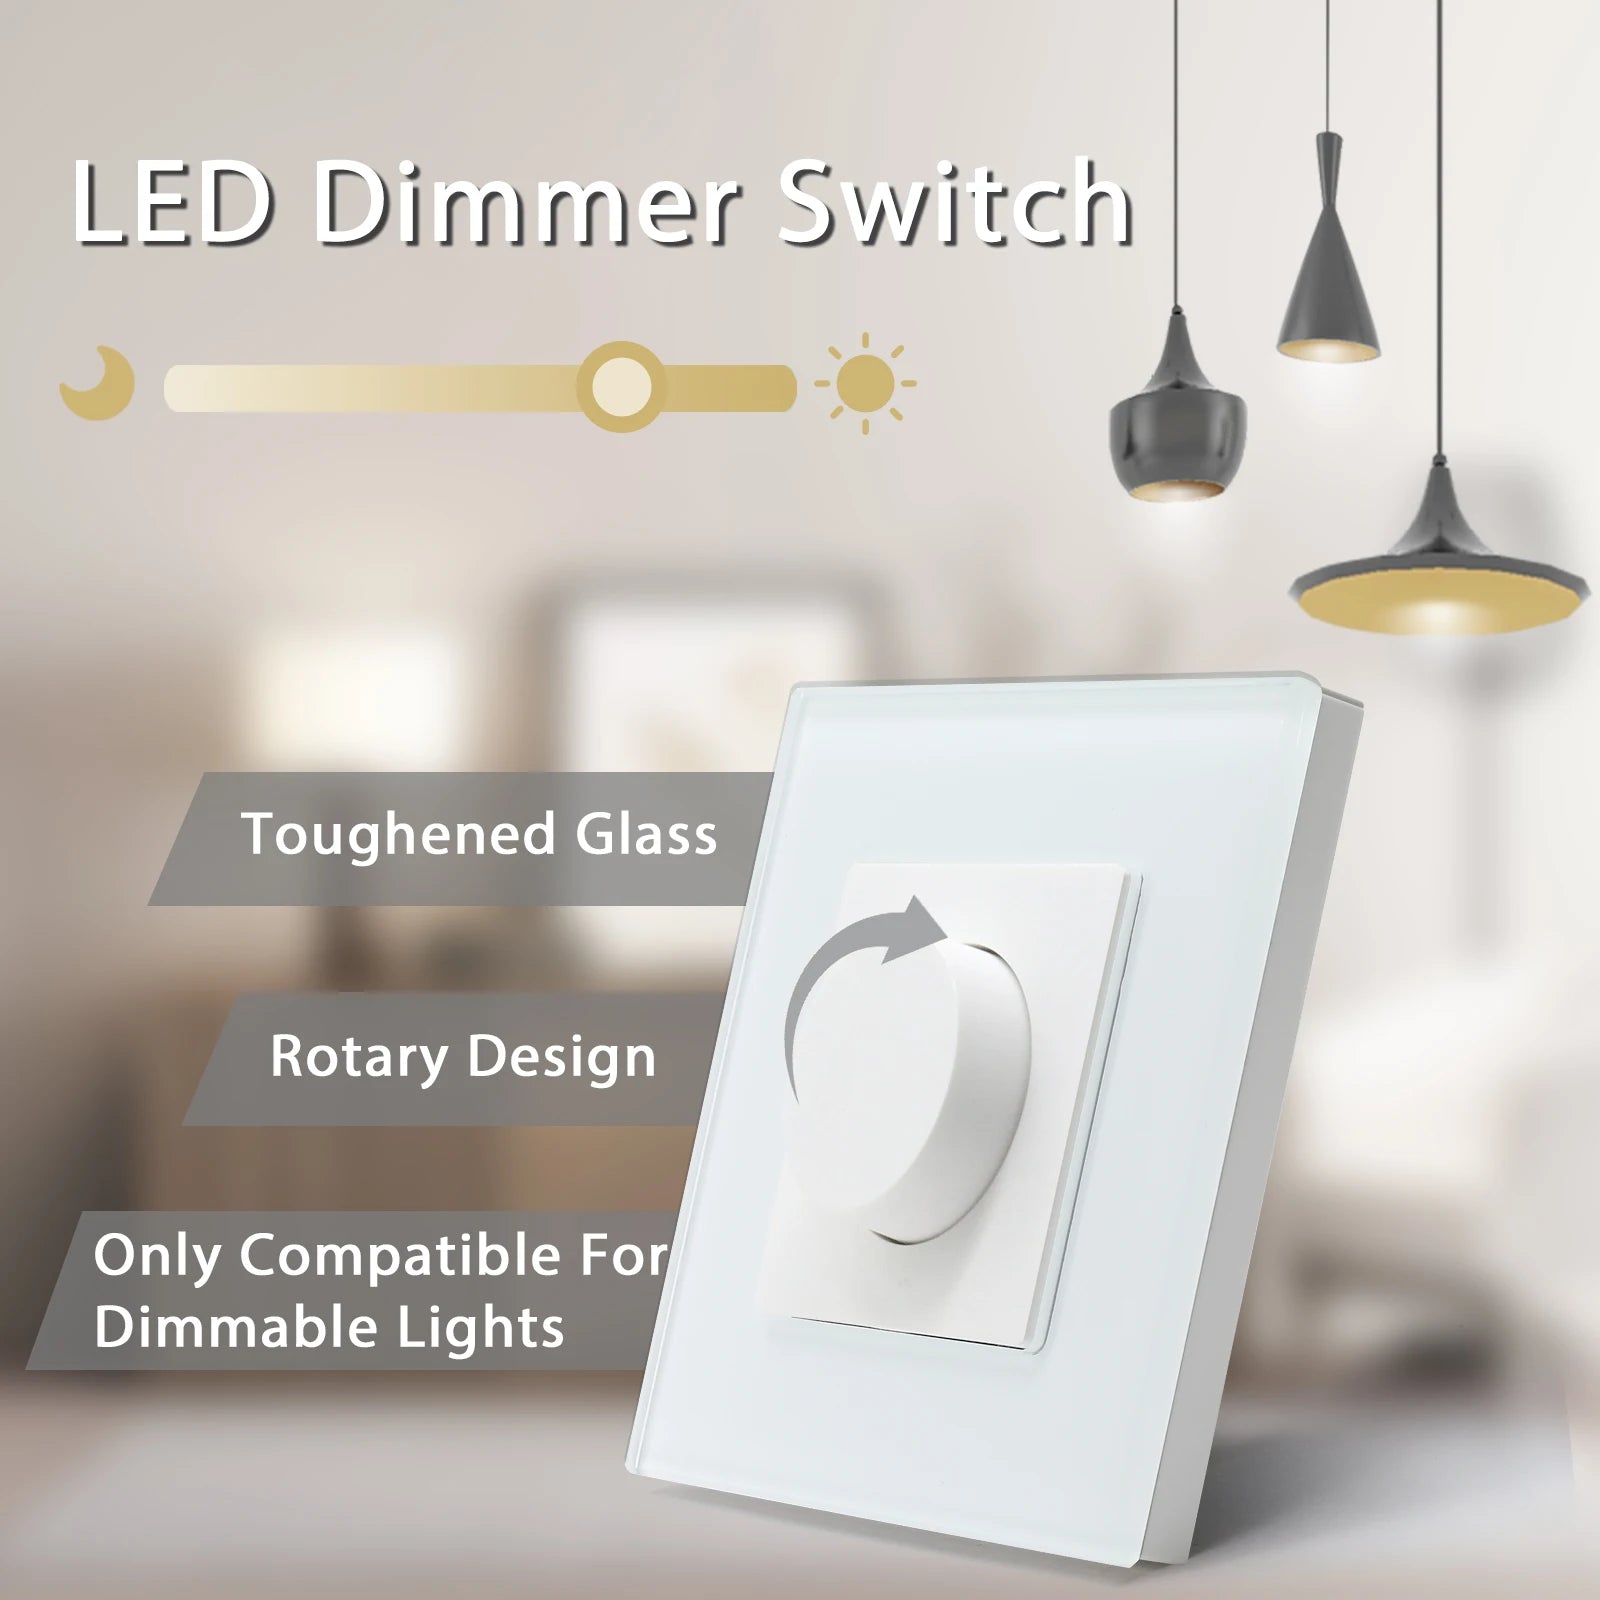 Wall Dimmer Switch Mechanical Rotary Knob Light Switch Dimmable LED Switch Crystal glass panel EU Standard 86*86mm